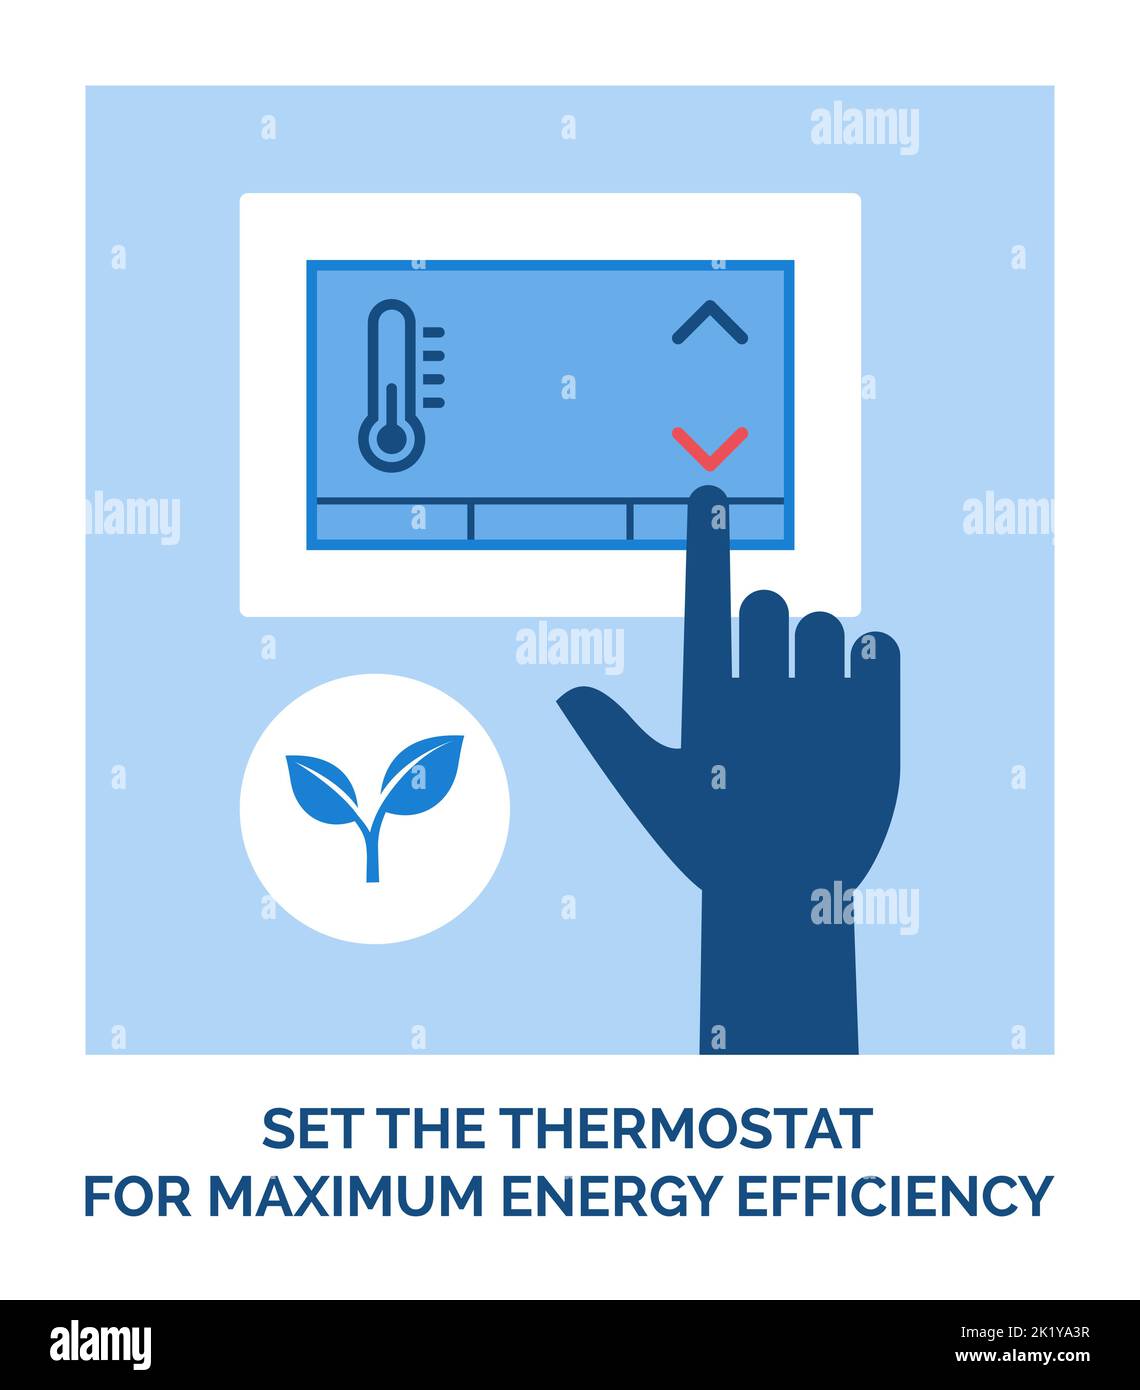 Eco-friendly lifestyle: set the thermostat for maximum energy efficiency Stock Vector